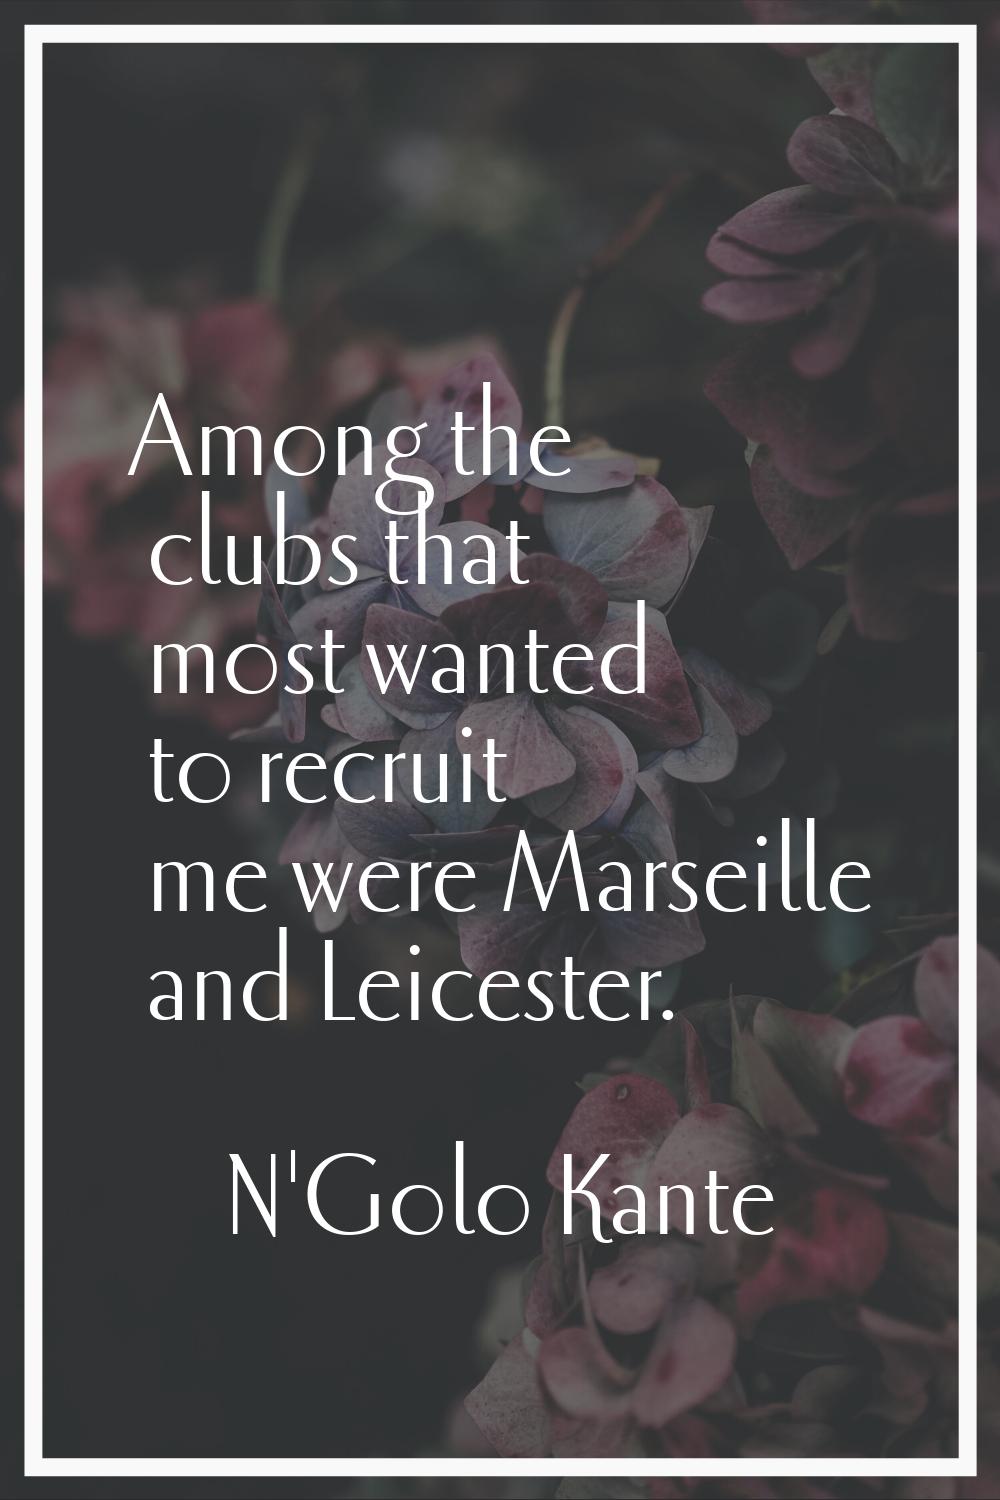 Among the clubs that most wanted to recruit me were Marseille and Leicester.